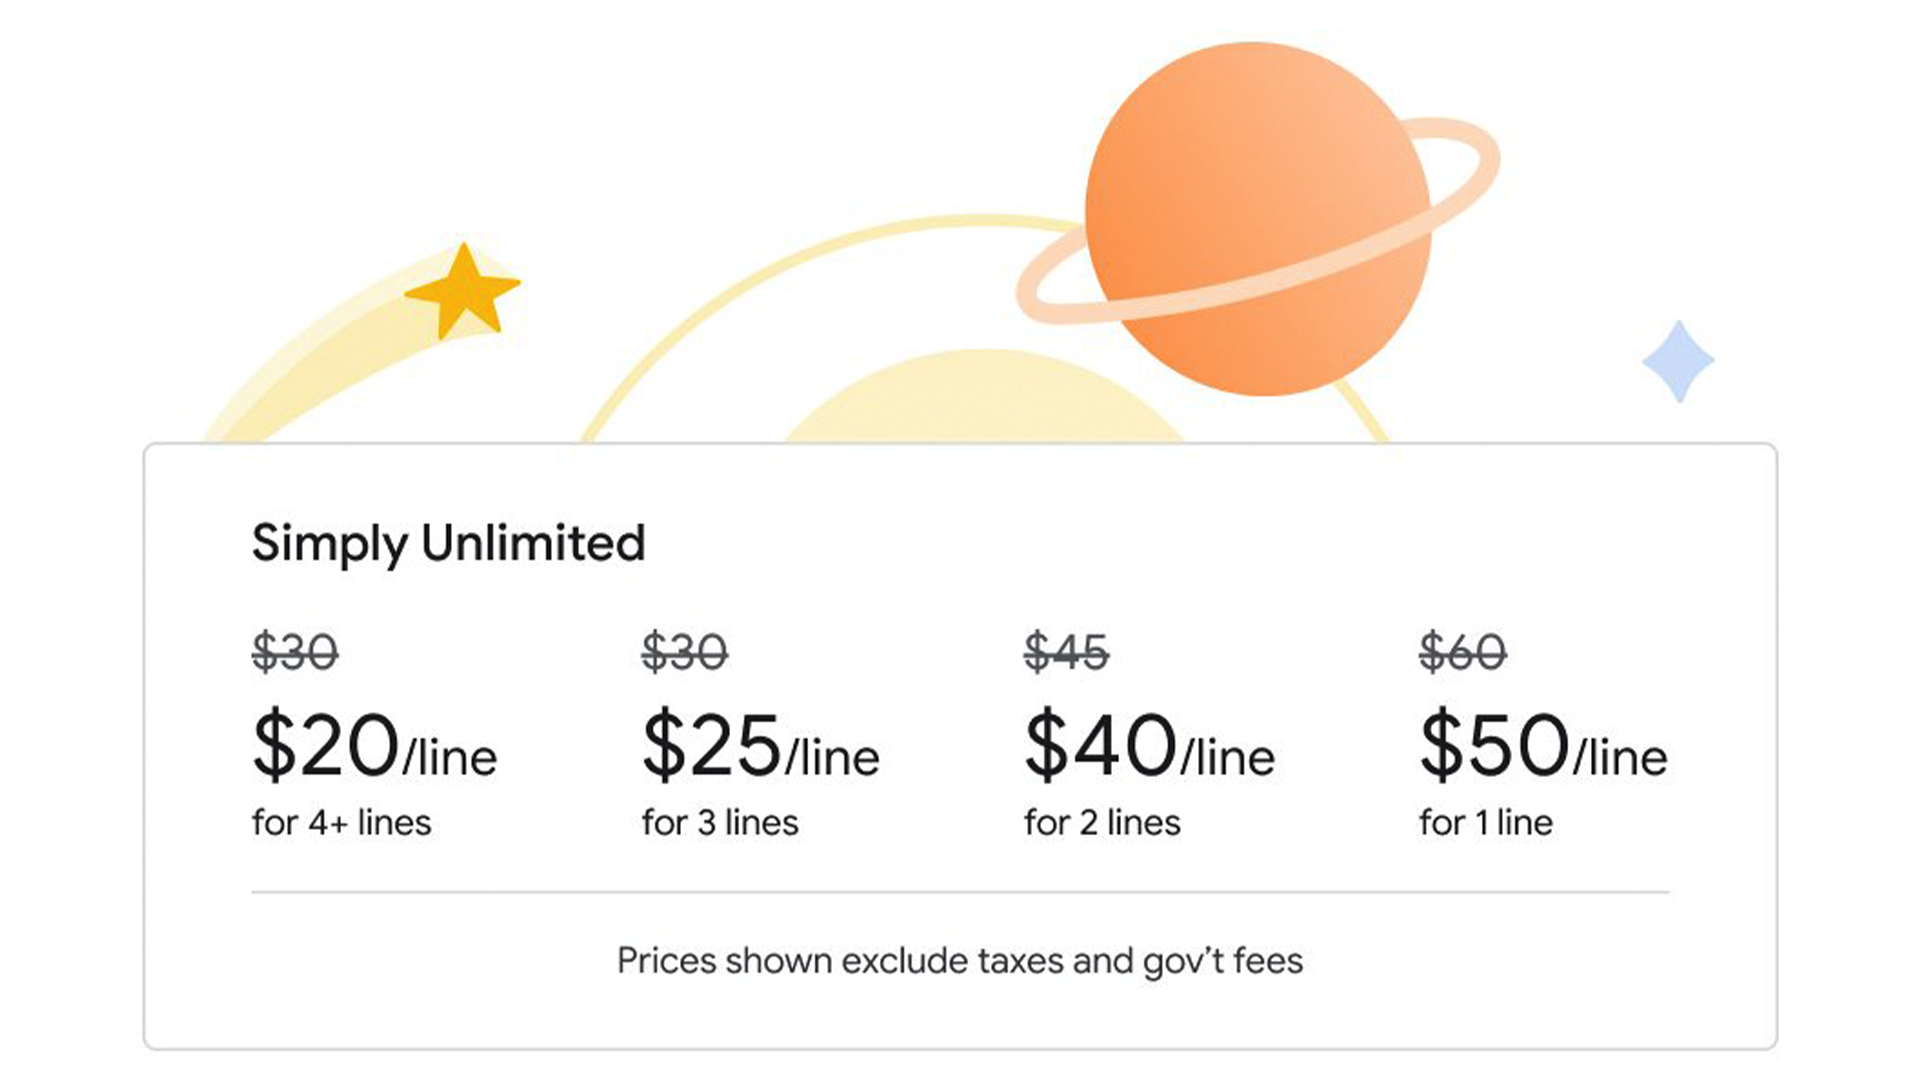 Google Fi's new Unlimited rates start at $50 for one line.